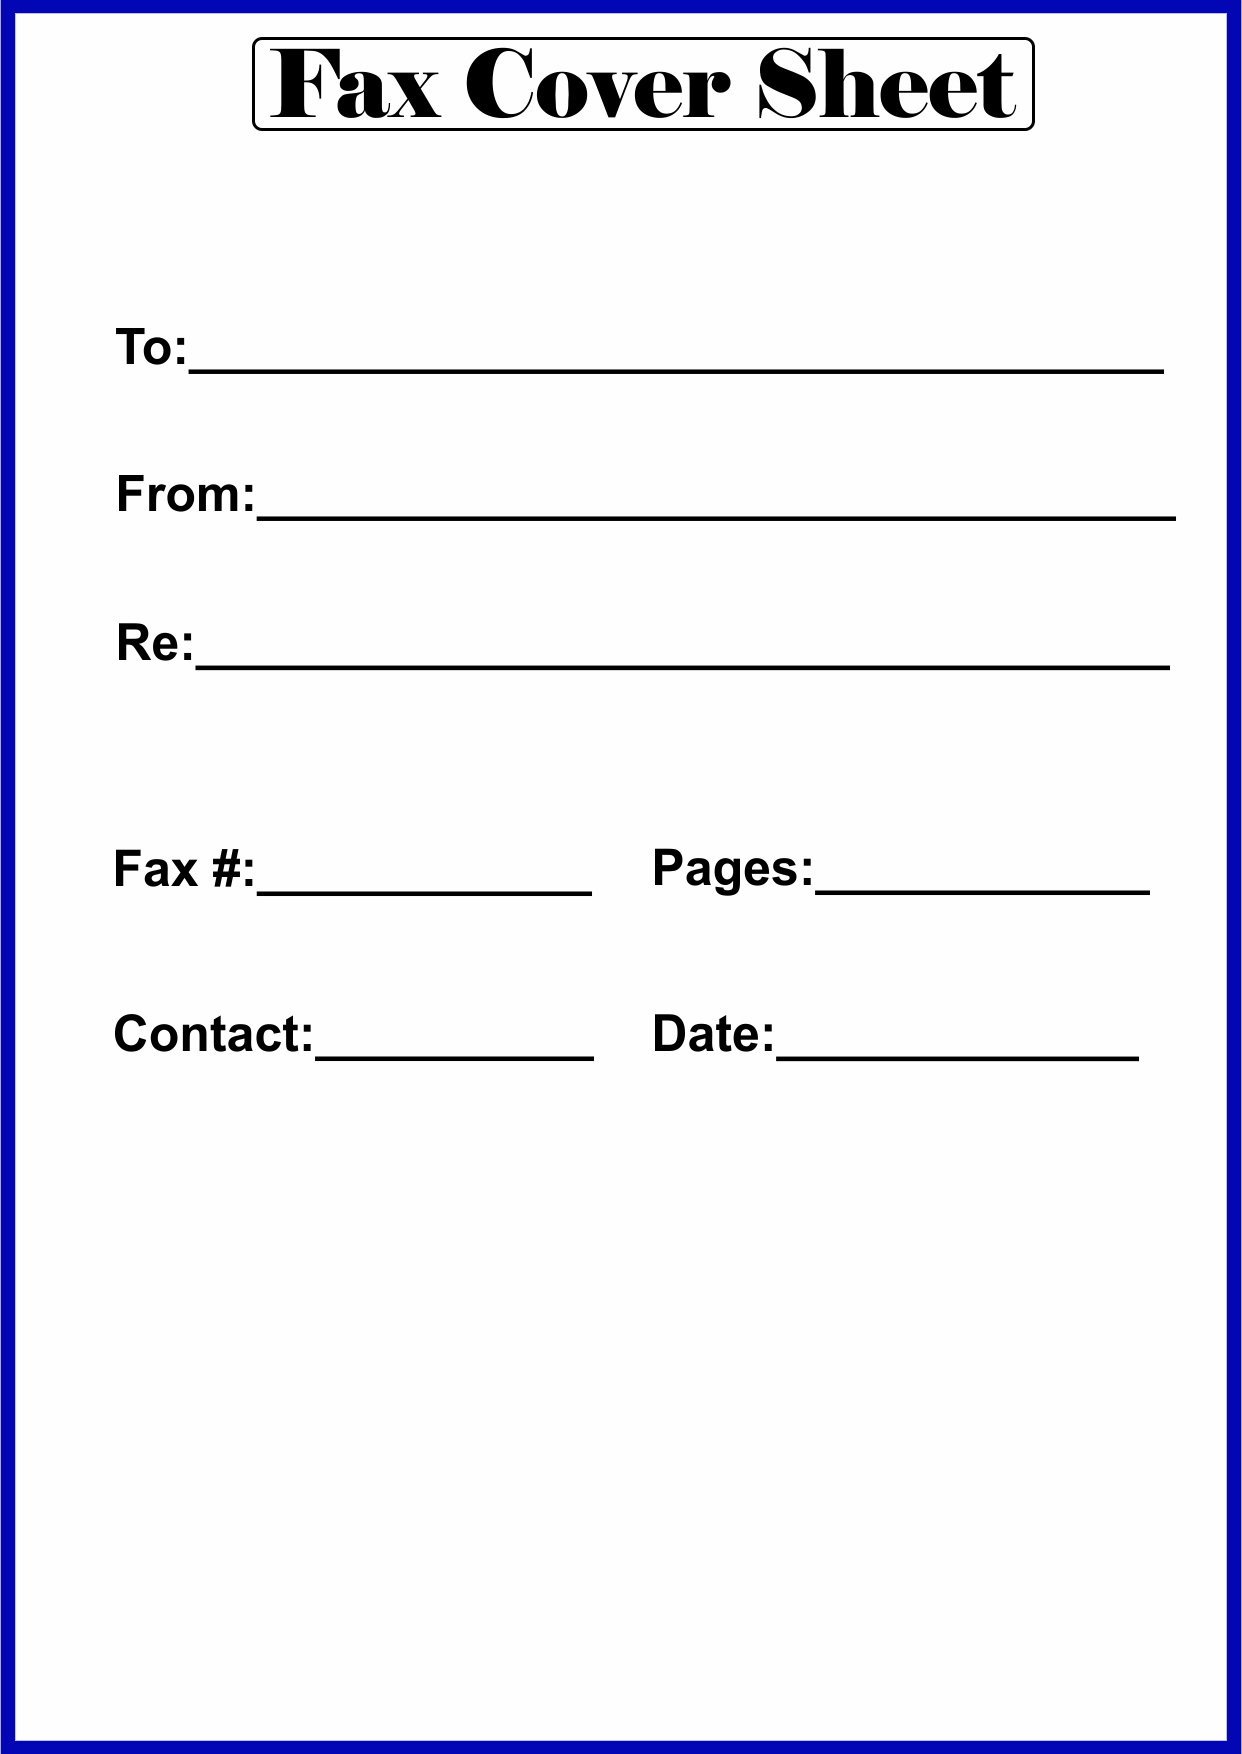 Fax Cover Letter Template Free from faxcoversheethub.com